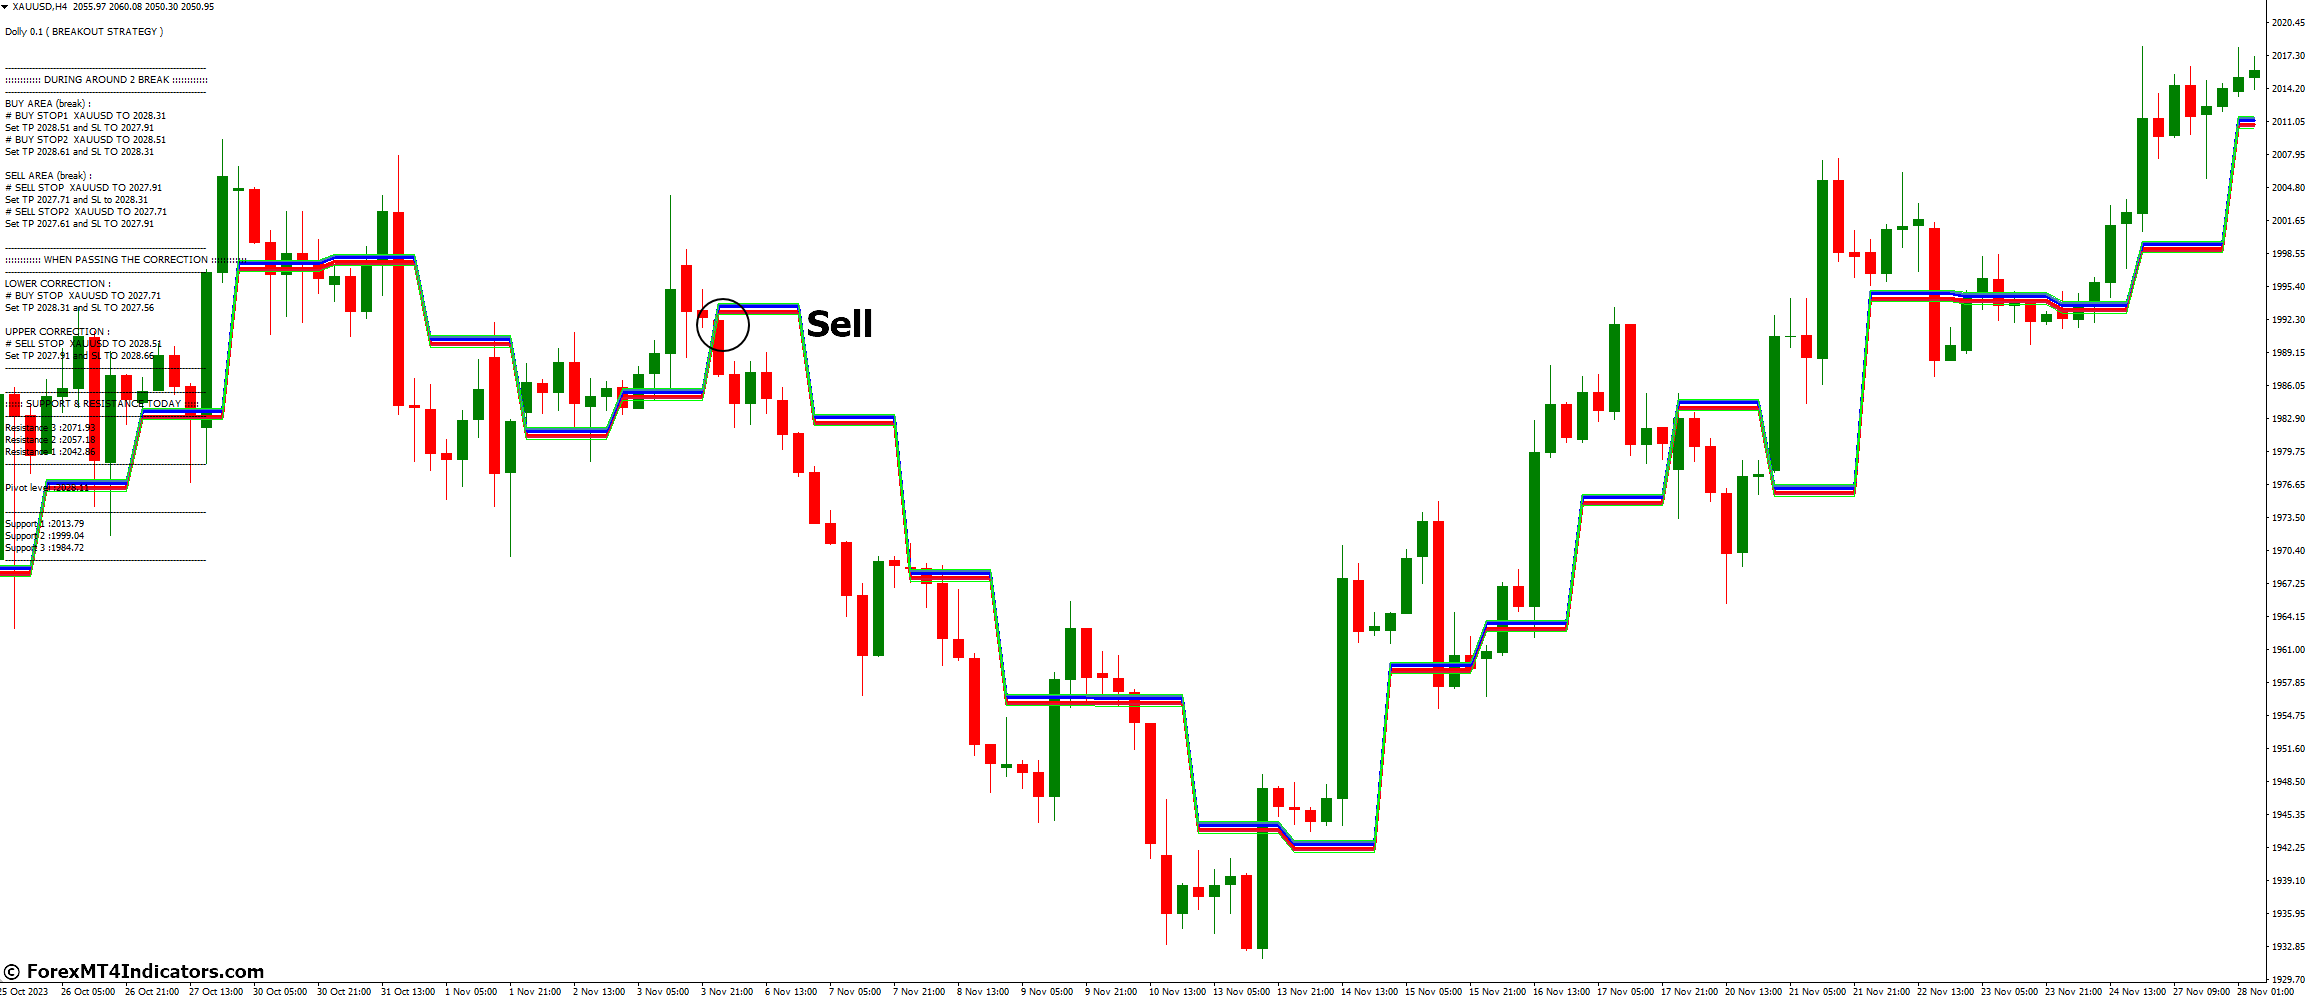 How to Trade with Dolly Indicator - Sell Entry